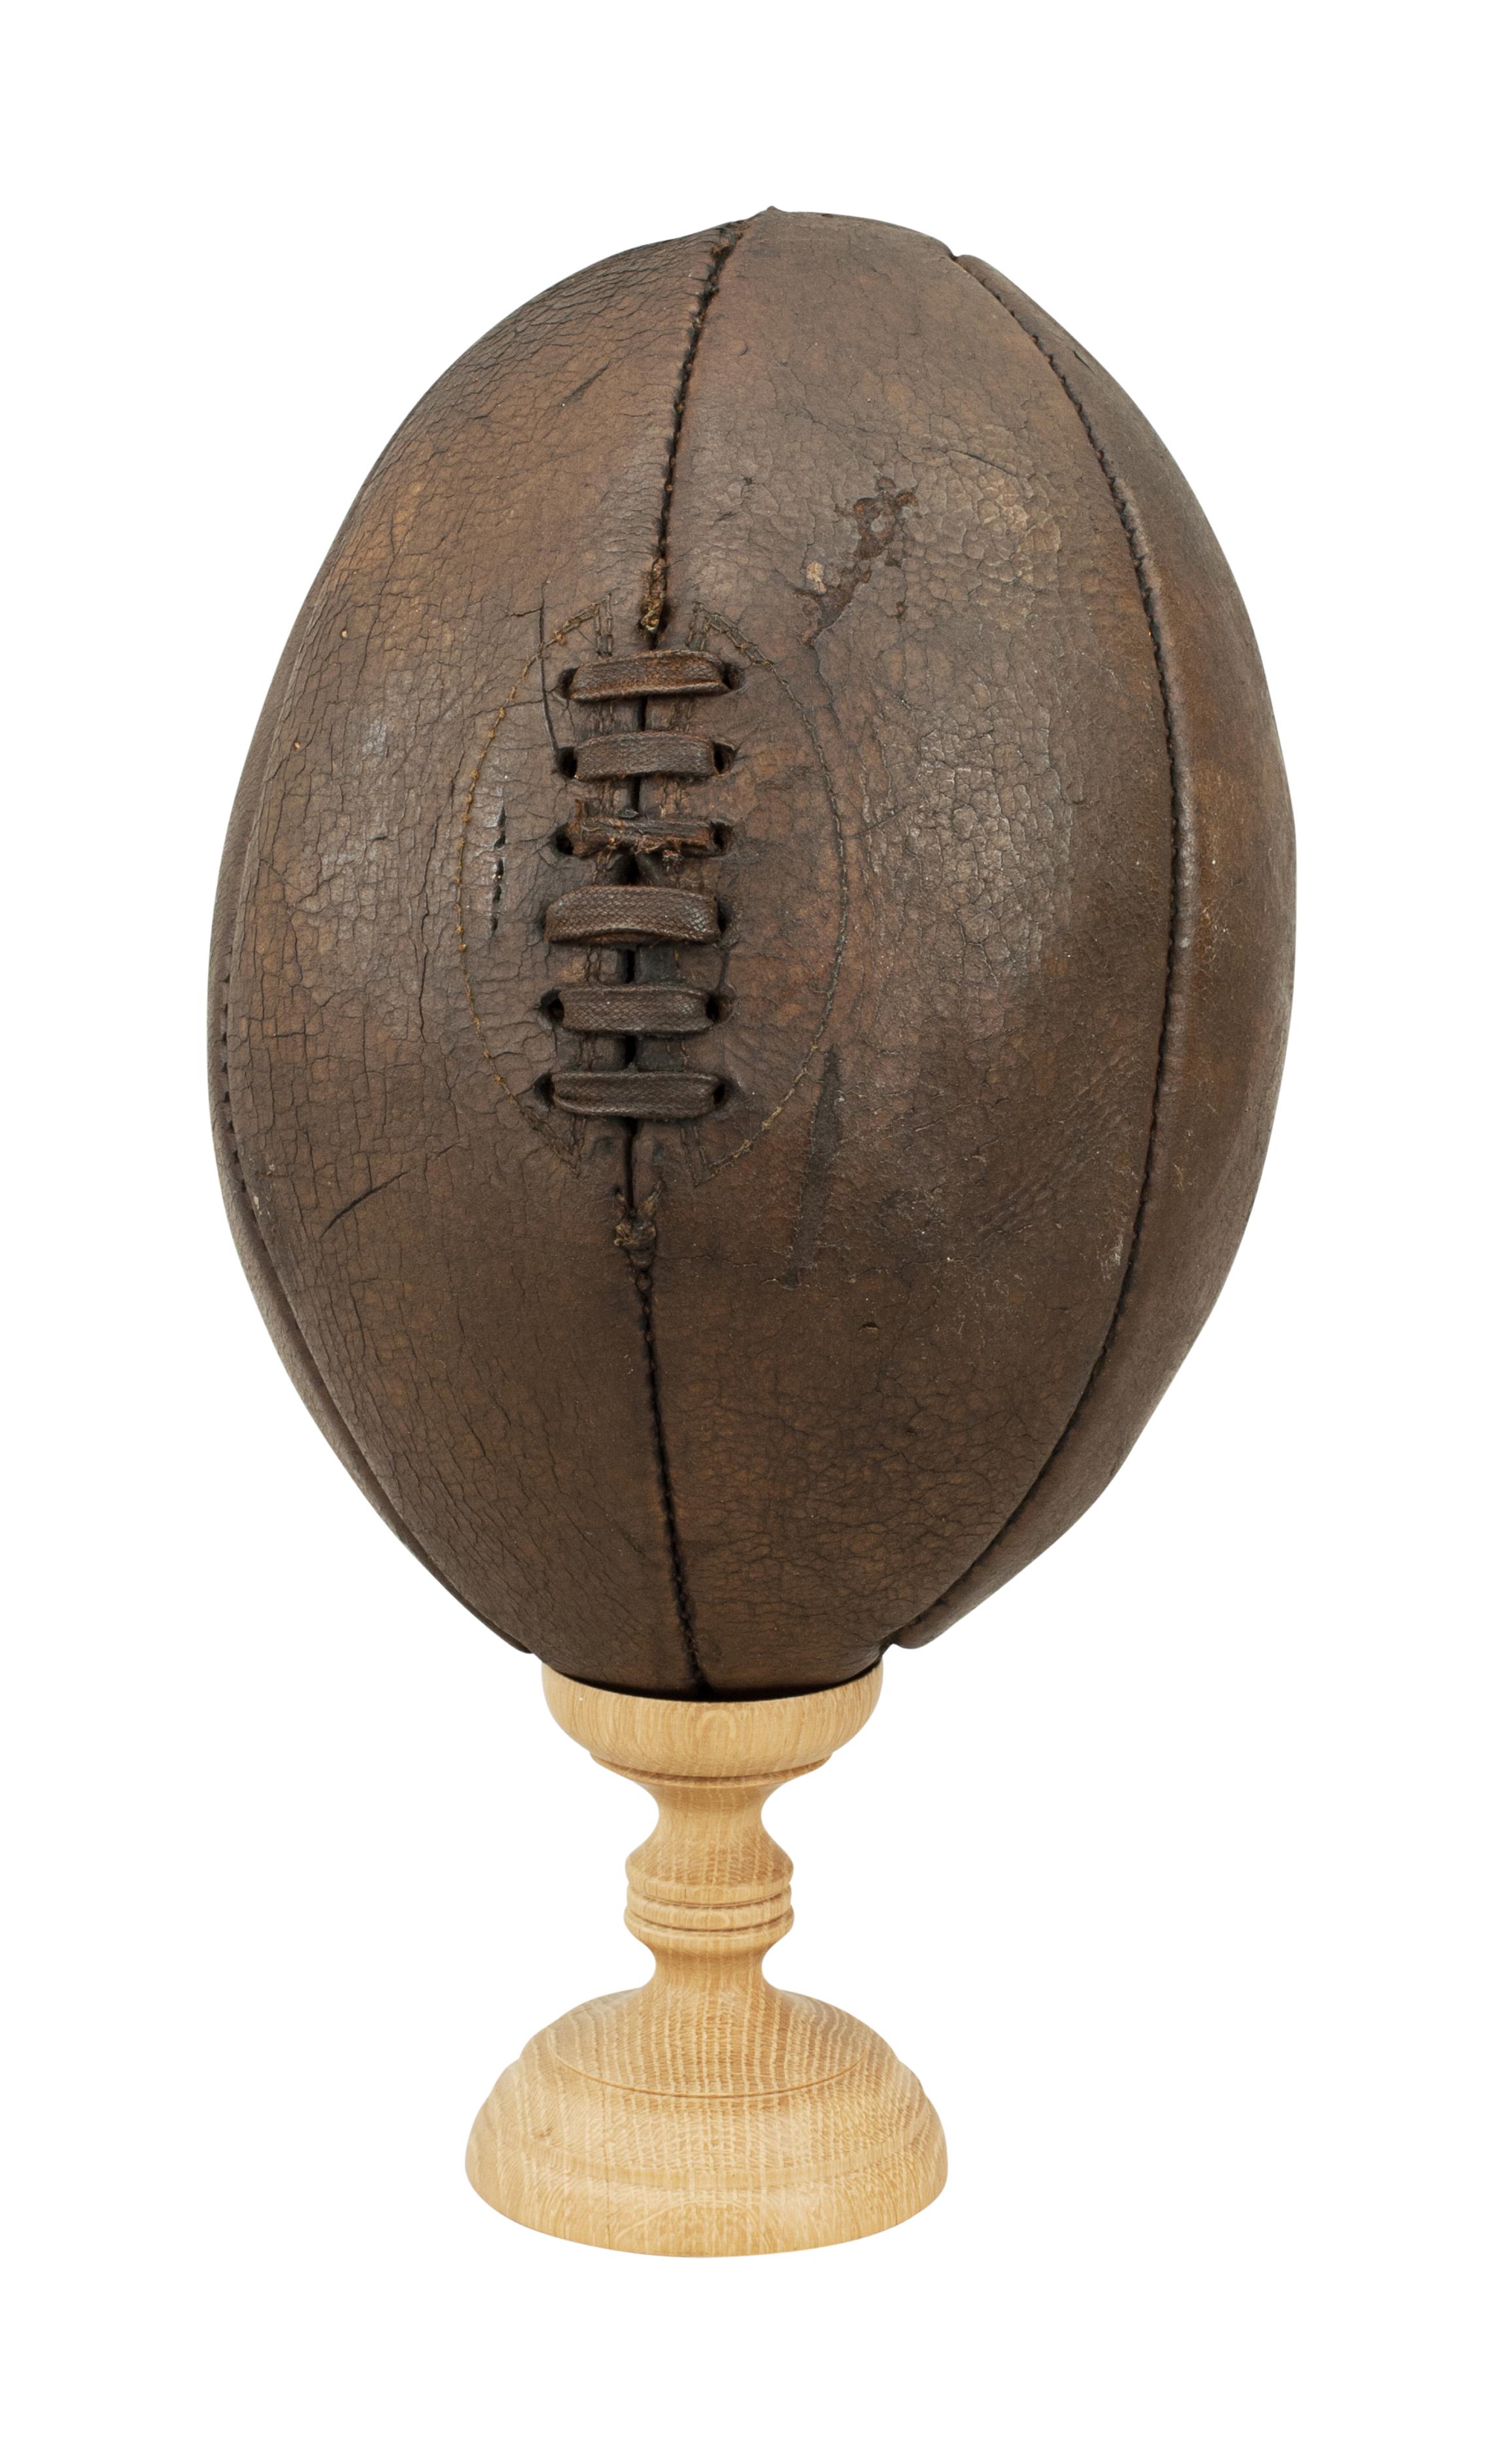 A good leather rugby ball made of six panels instead of the usual four panels.
The ball has had a lot of use and shoes its age well, with good color and patina.